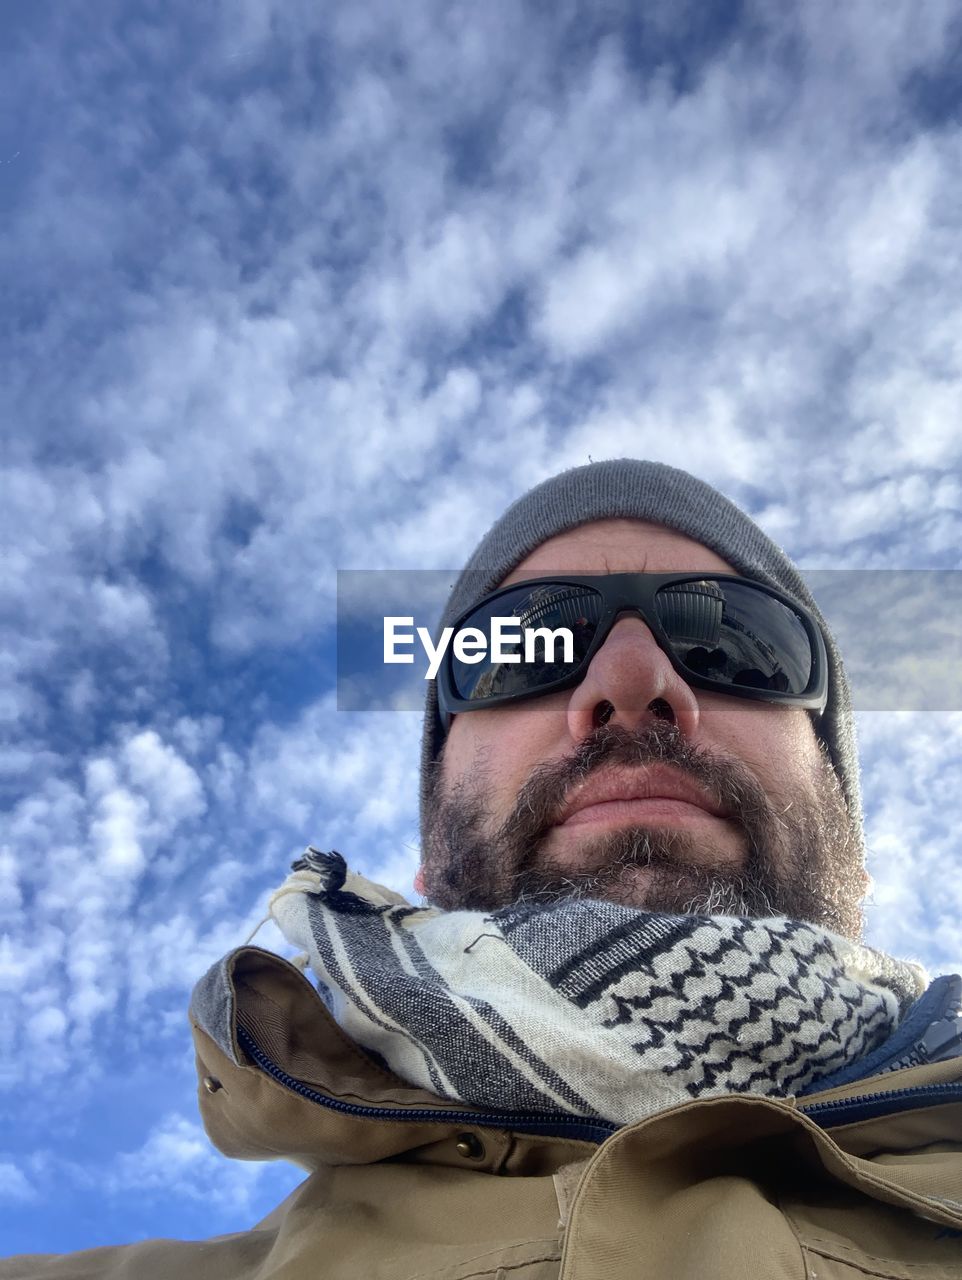 cloud, sky, one person, adult, blue, nature, men, leisure activity, day, sports, low angle view, portrait, young adult, clothing, outdoors, lifestyles, extreme sports, winter, snow, cold temperature, emotion, headshot, activity, looking, warm clothing, adventure